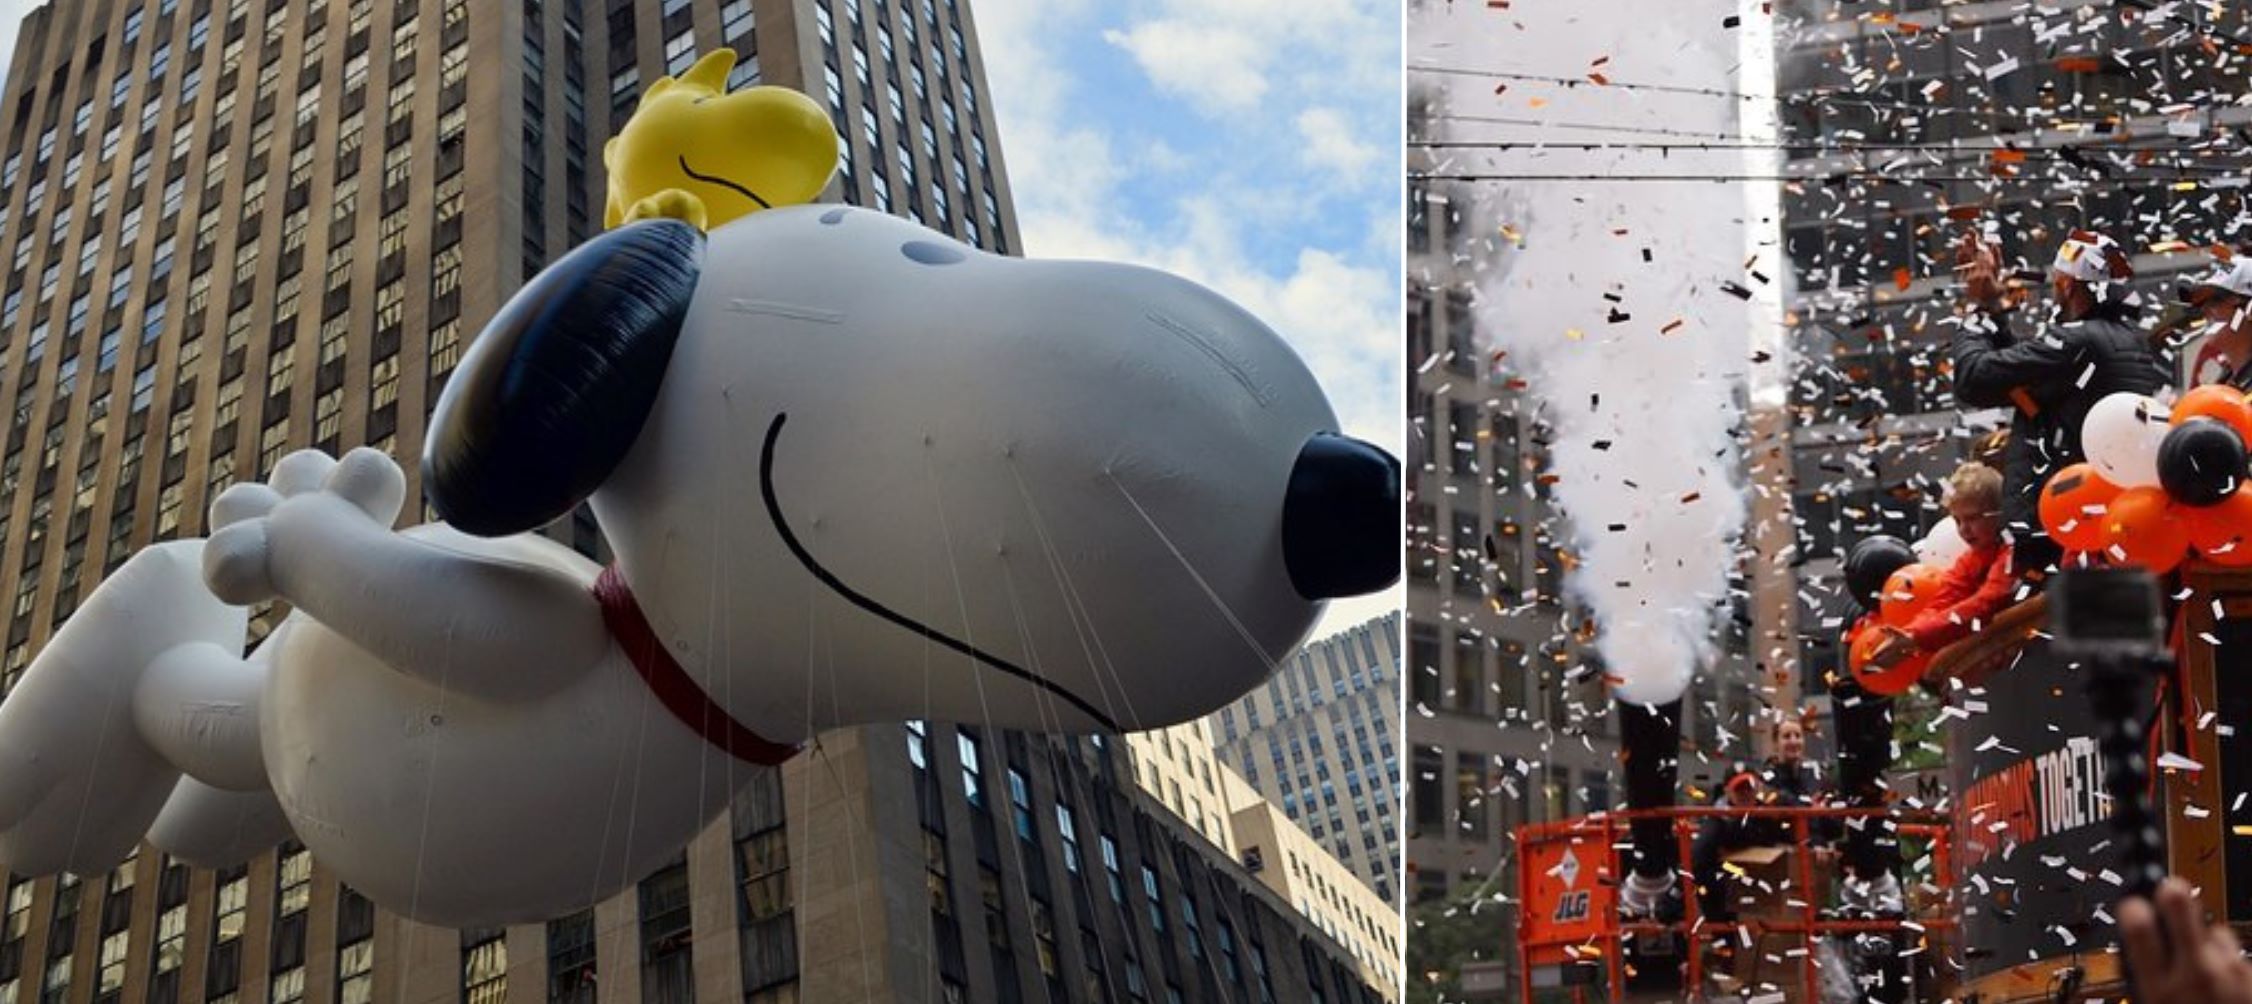 10 Most Iconic Parade Inflatables of All Time